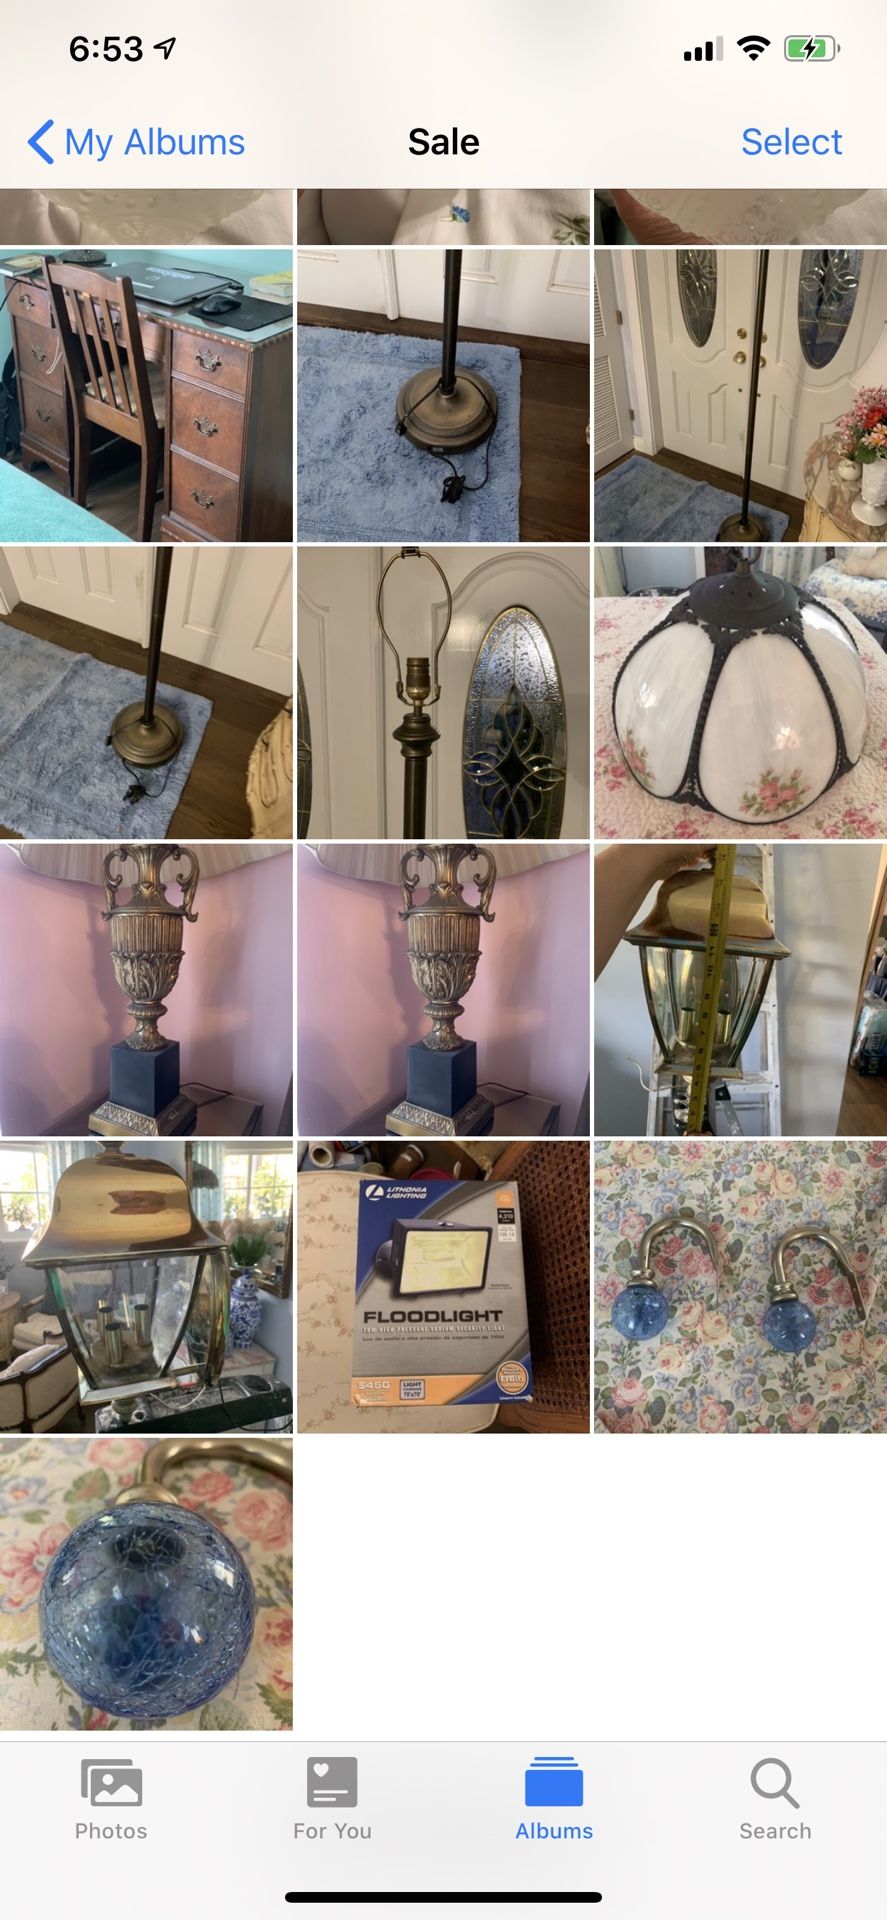 Tons of antiques vintage furniture lights flood base of Tiffany lamp brass outdoor light curtain ties